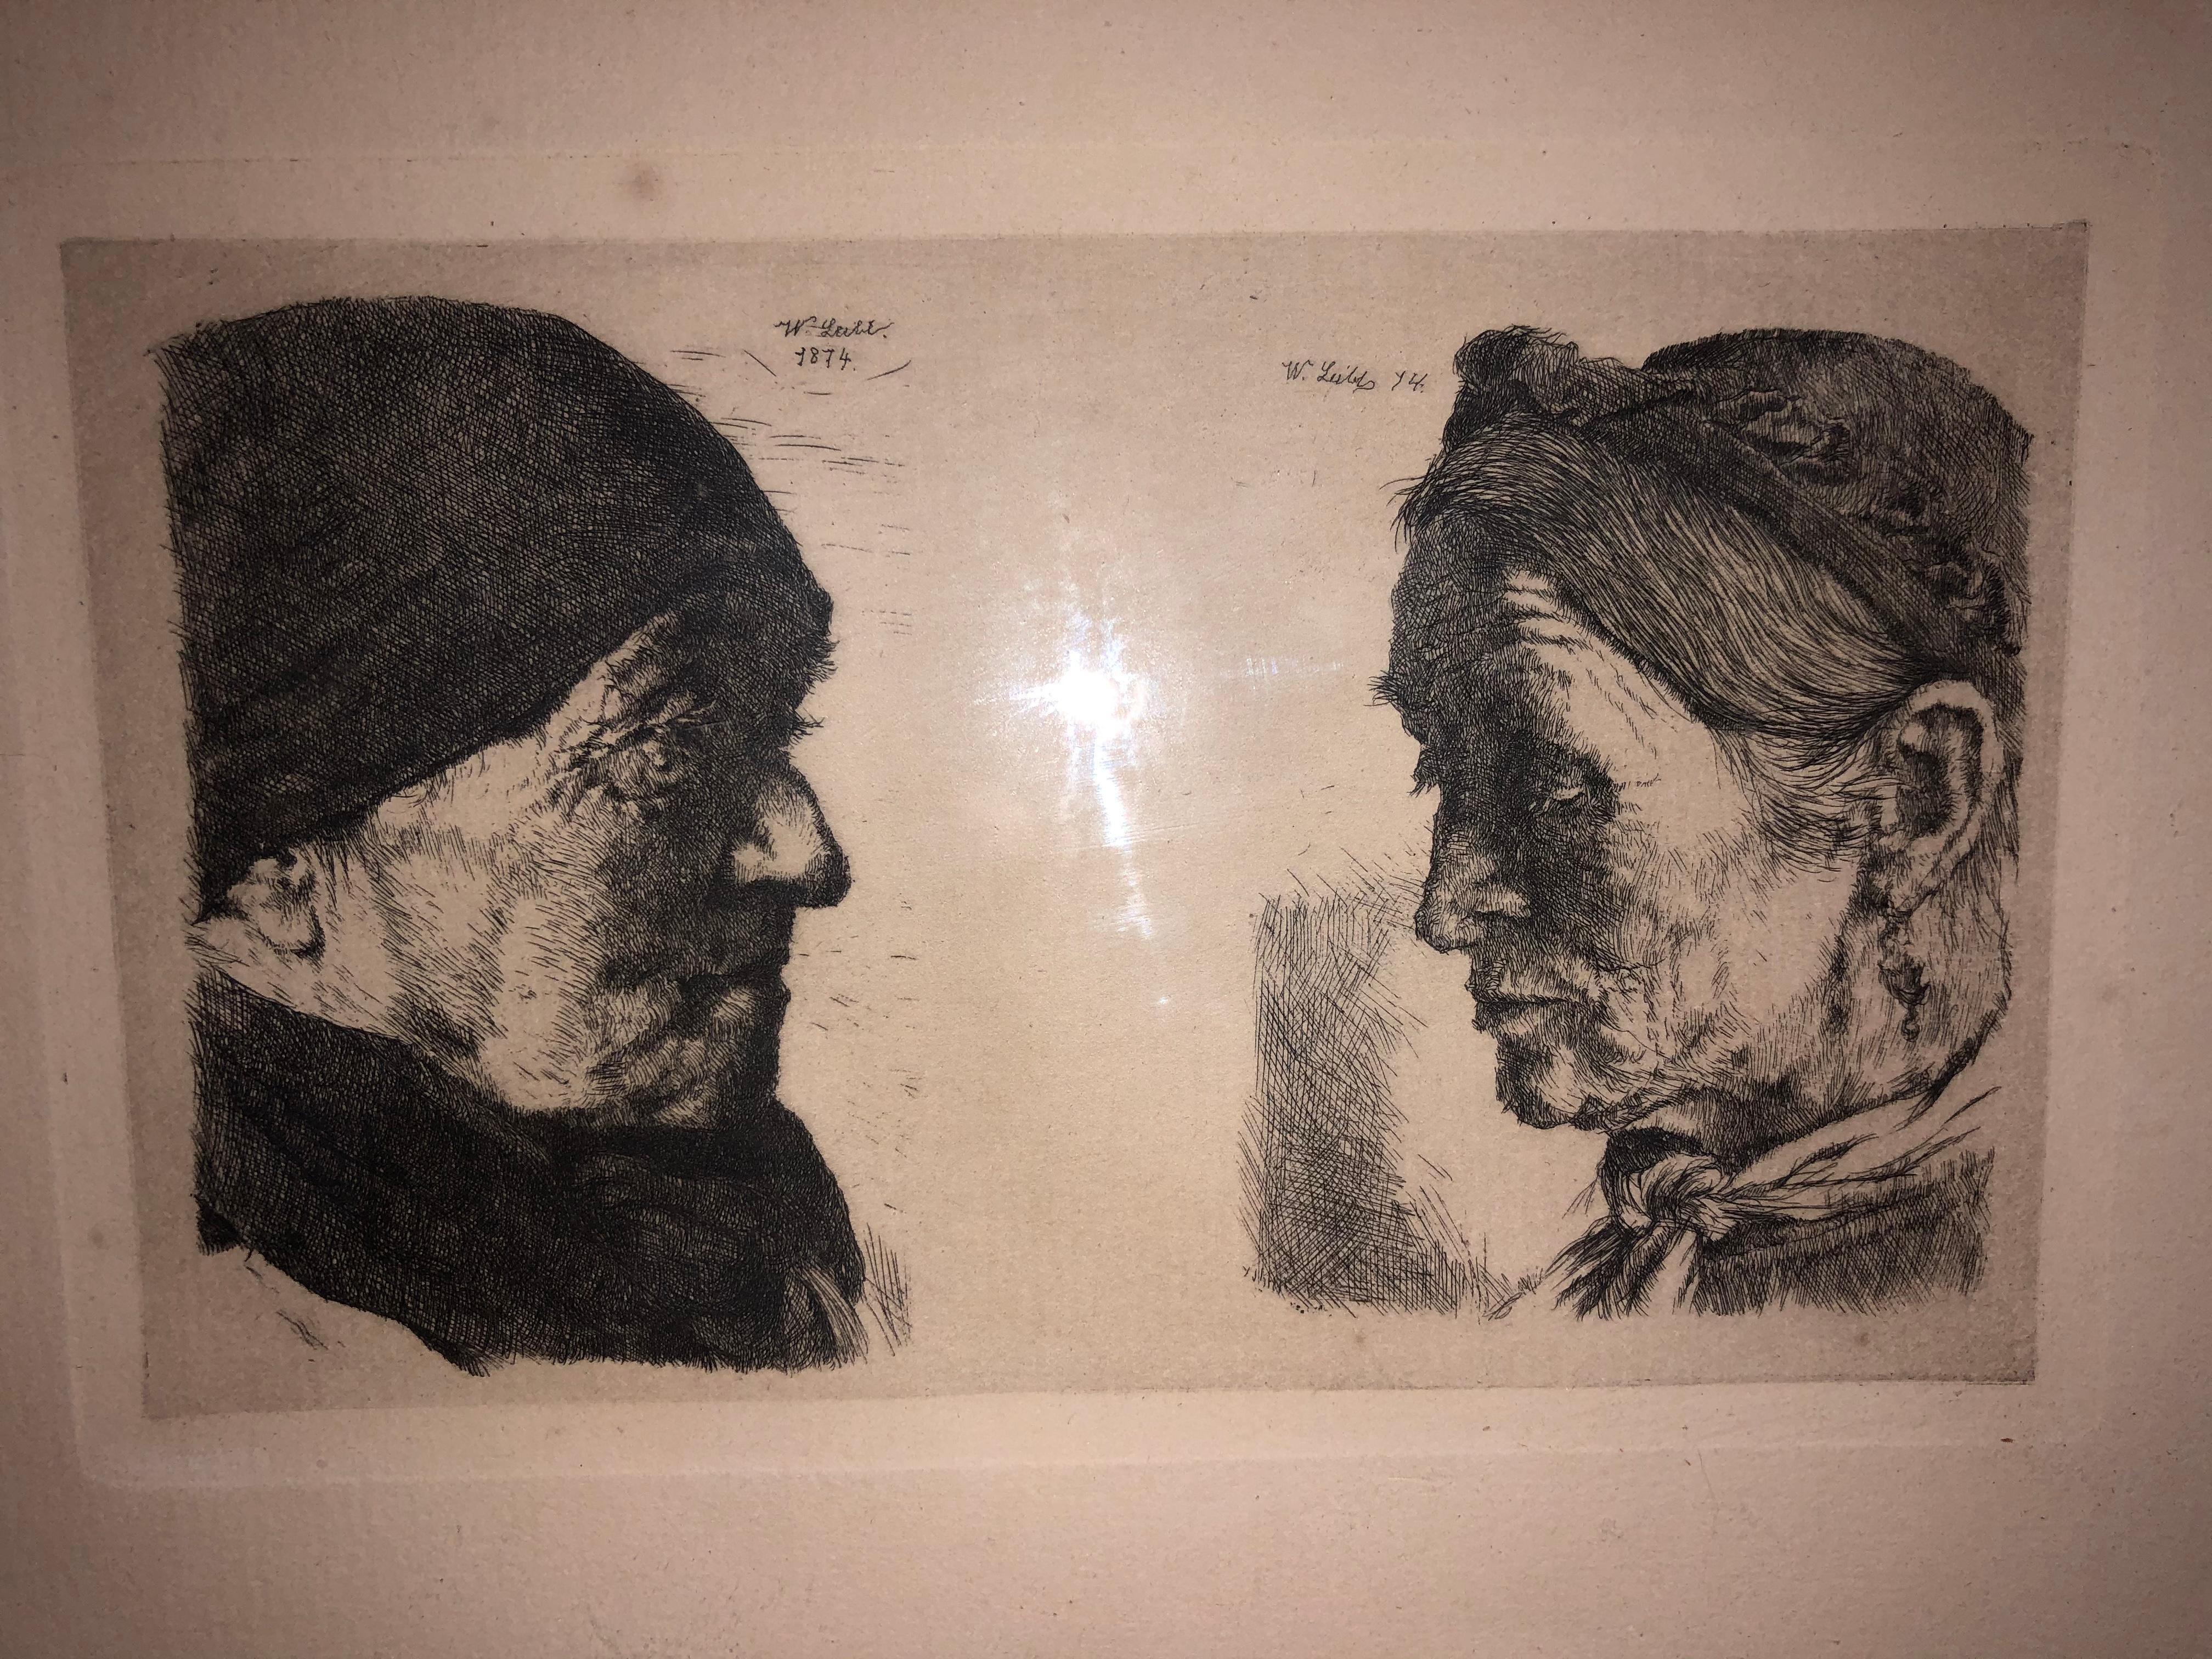 Wilhelm Leibl: 1844-1900. Well listed German artist. He has had auction results over $360,000 for paintings and over $3800 for a print. It’s beautiful at tune of two peasant women measures 6 inches wide by 3 3/4 inches high. The frame measures 10